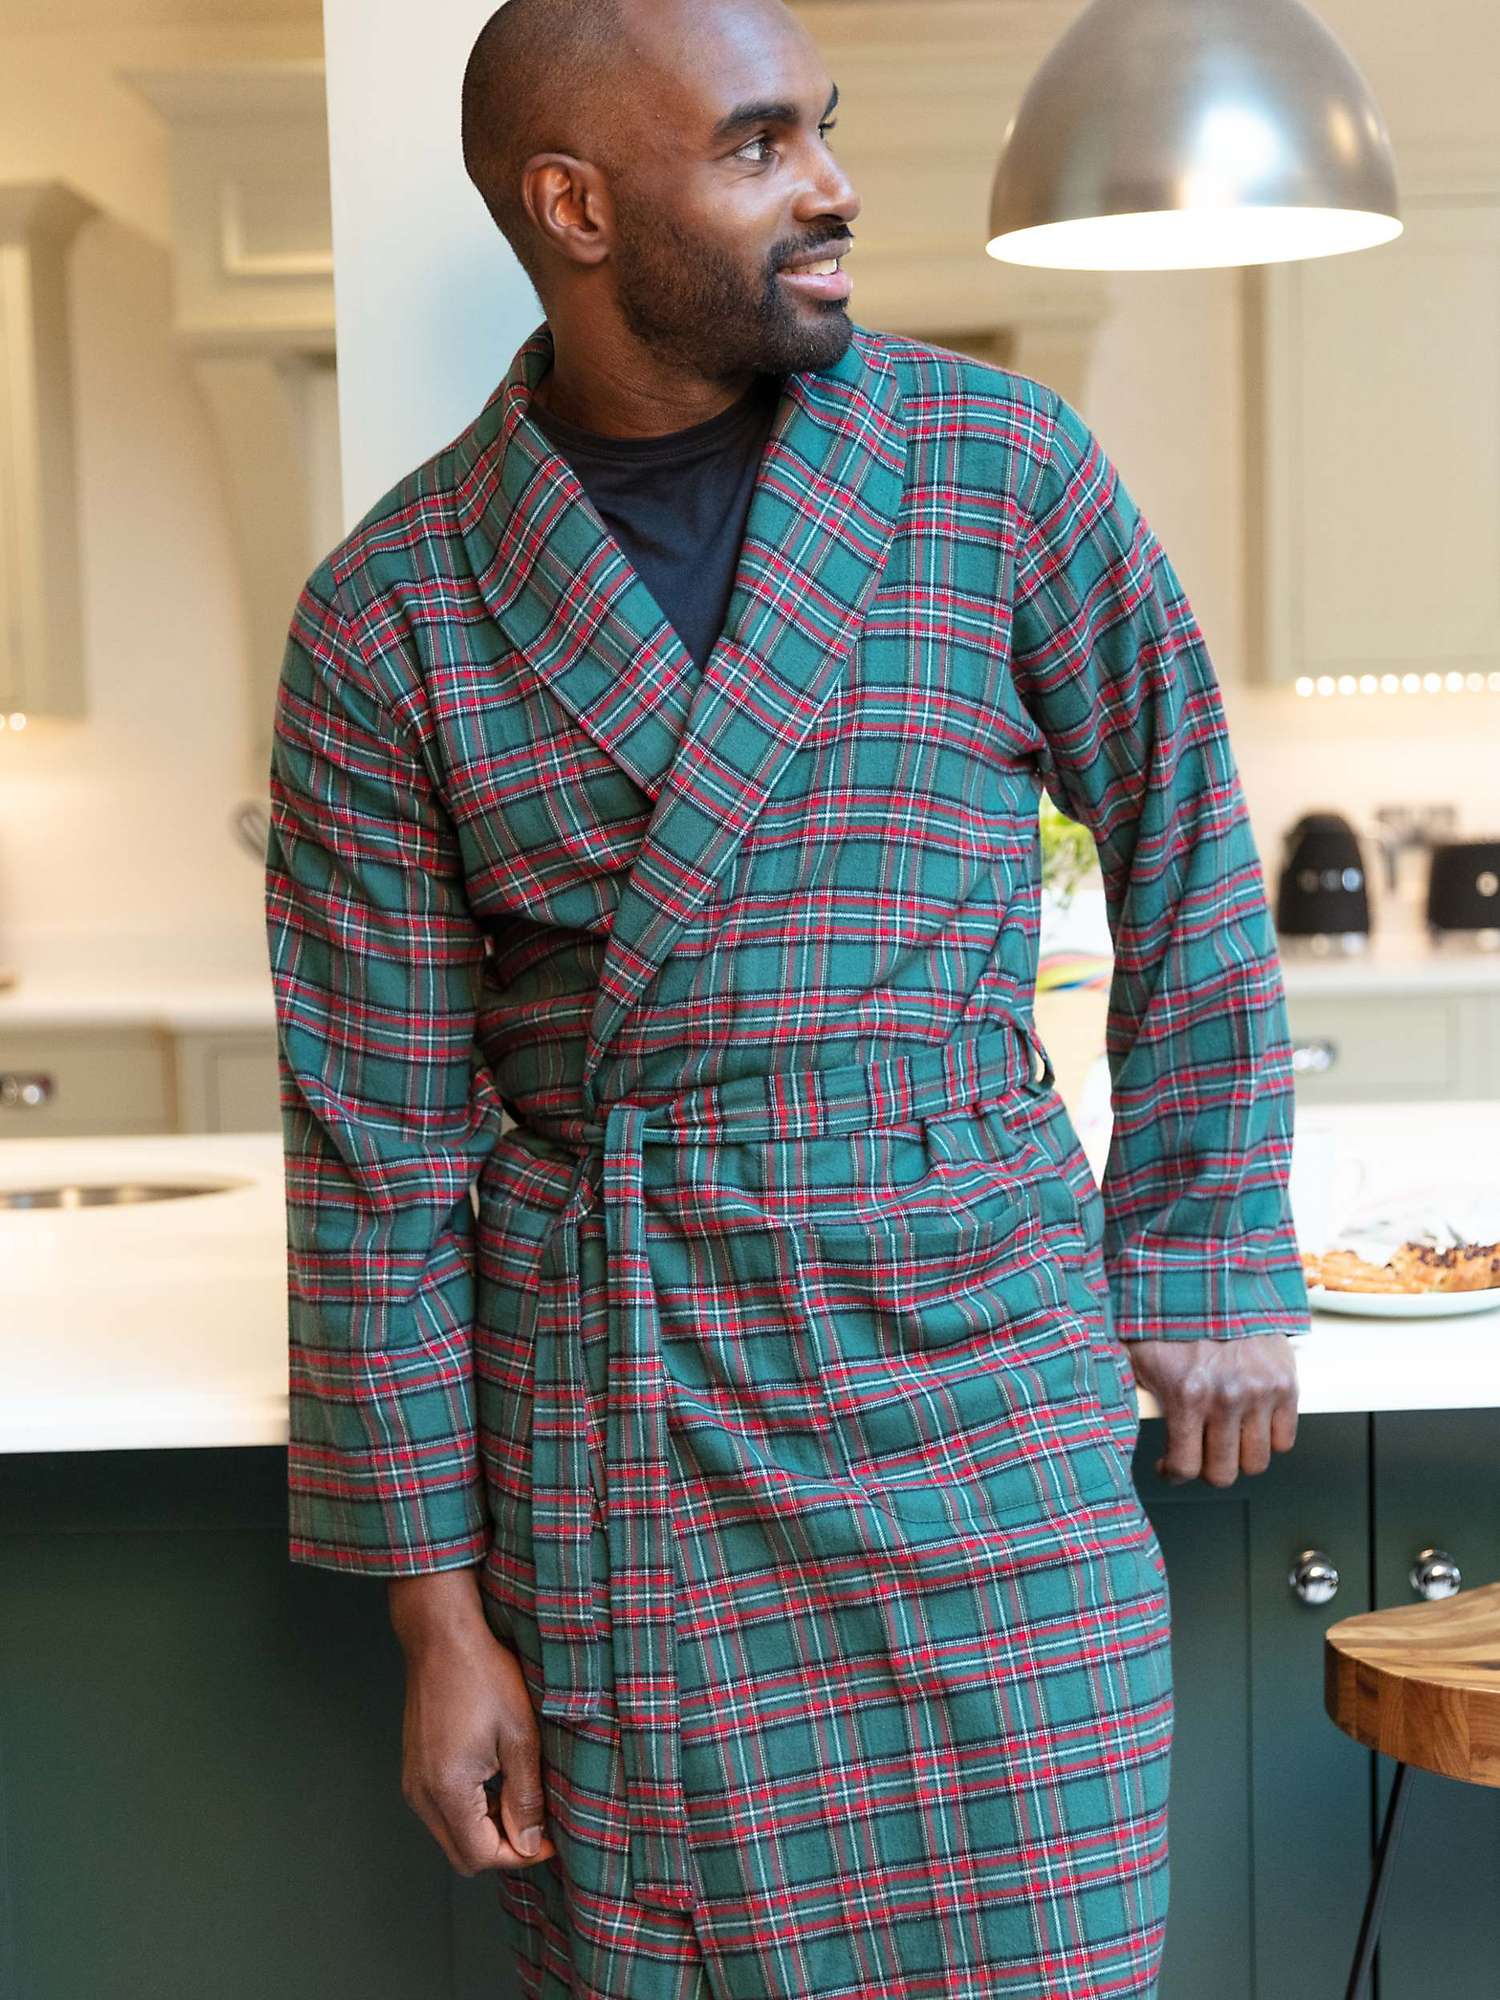 Buy Cyberjammies Whistler Check Long Dressing Gown, Dark Green/Red Online at johnlewis.com